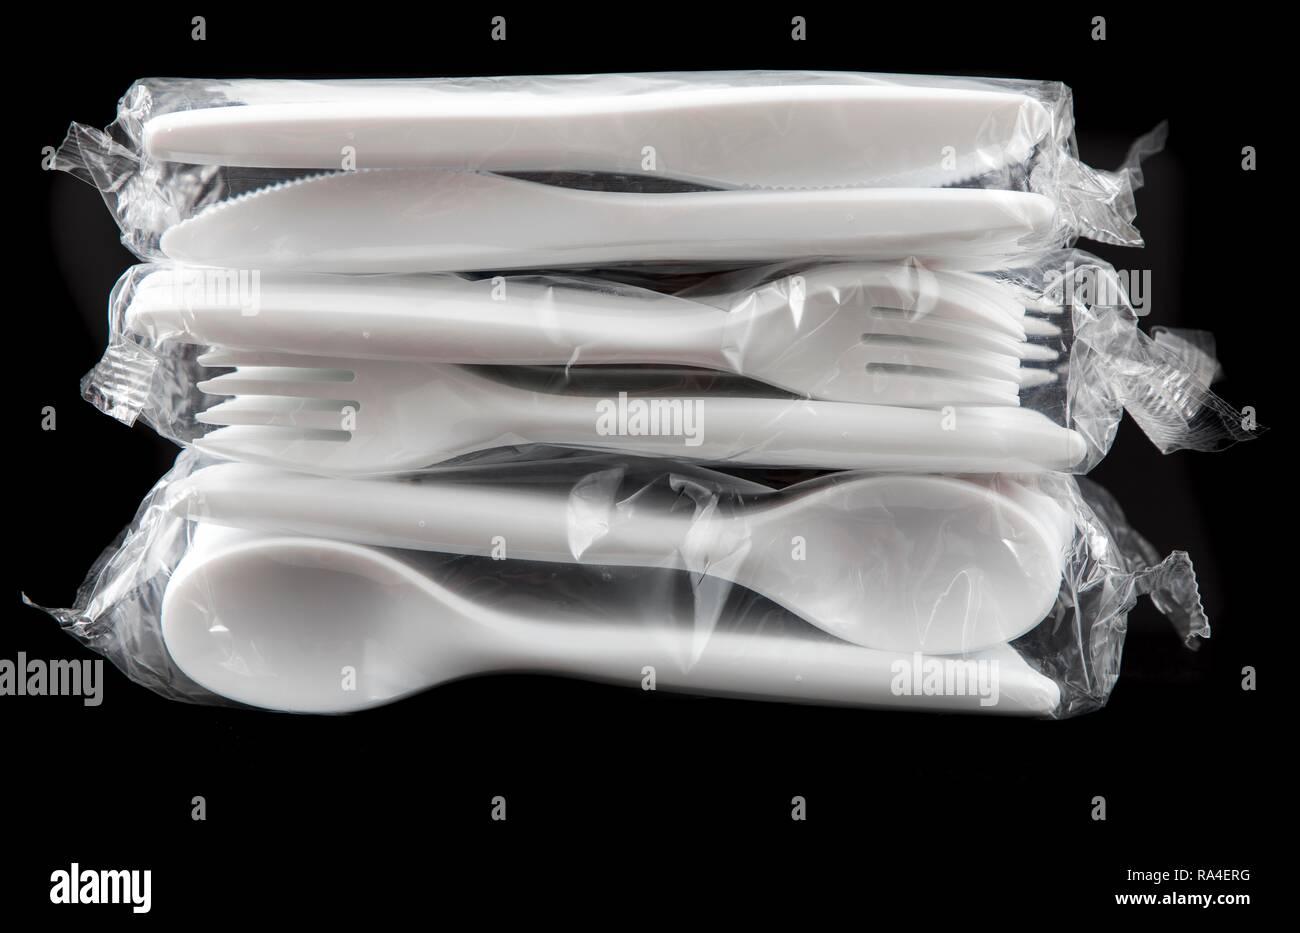 Large pack of plastic cutlery, disposable cutlery, knives, forks, spoons, plastic waste Stock Photo